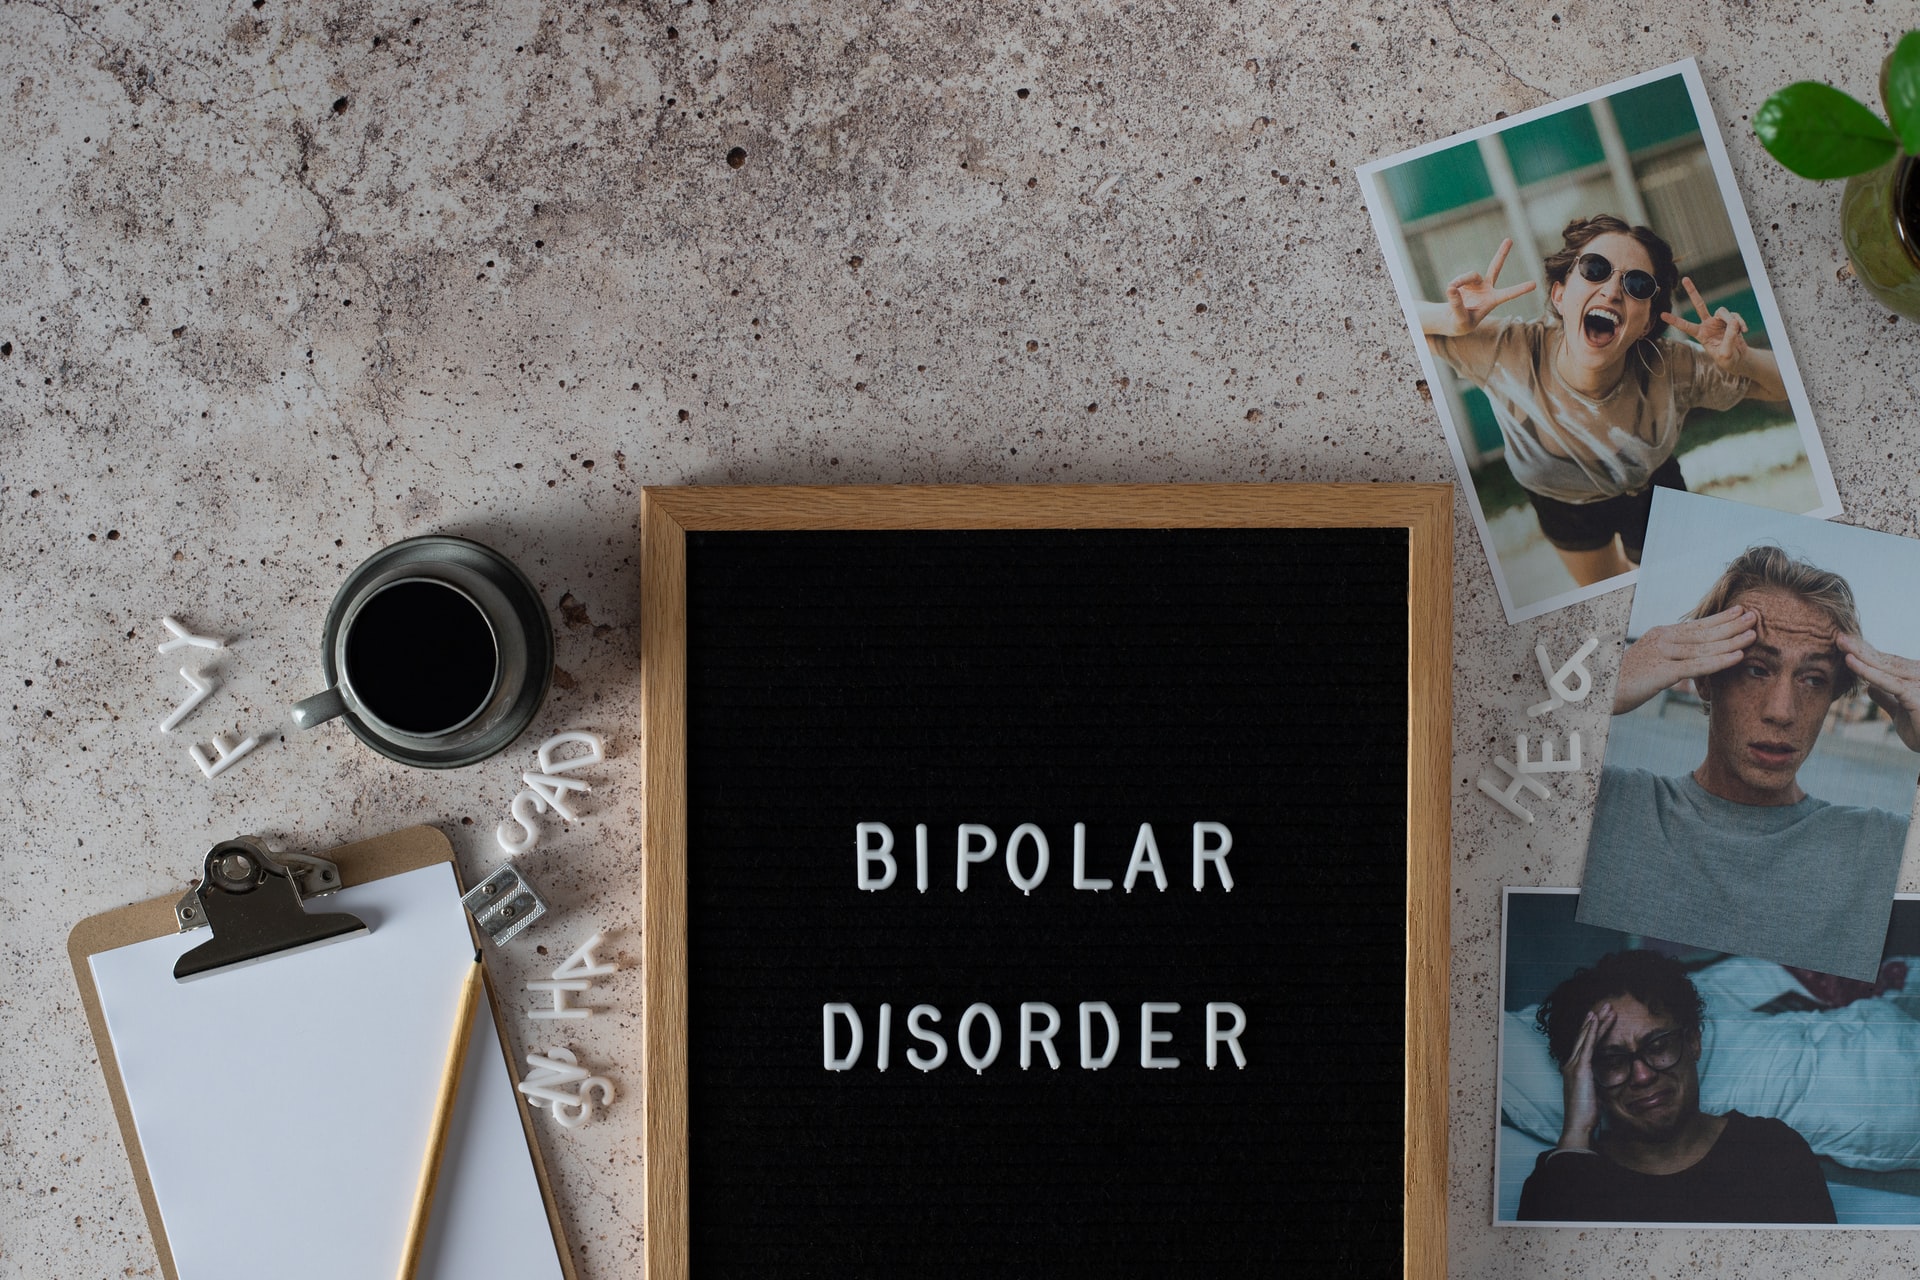 Bipolar Disorder with pictures of people showing high and low mood